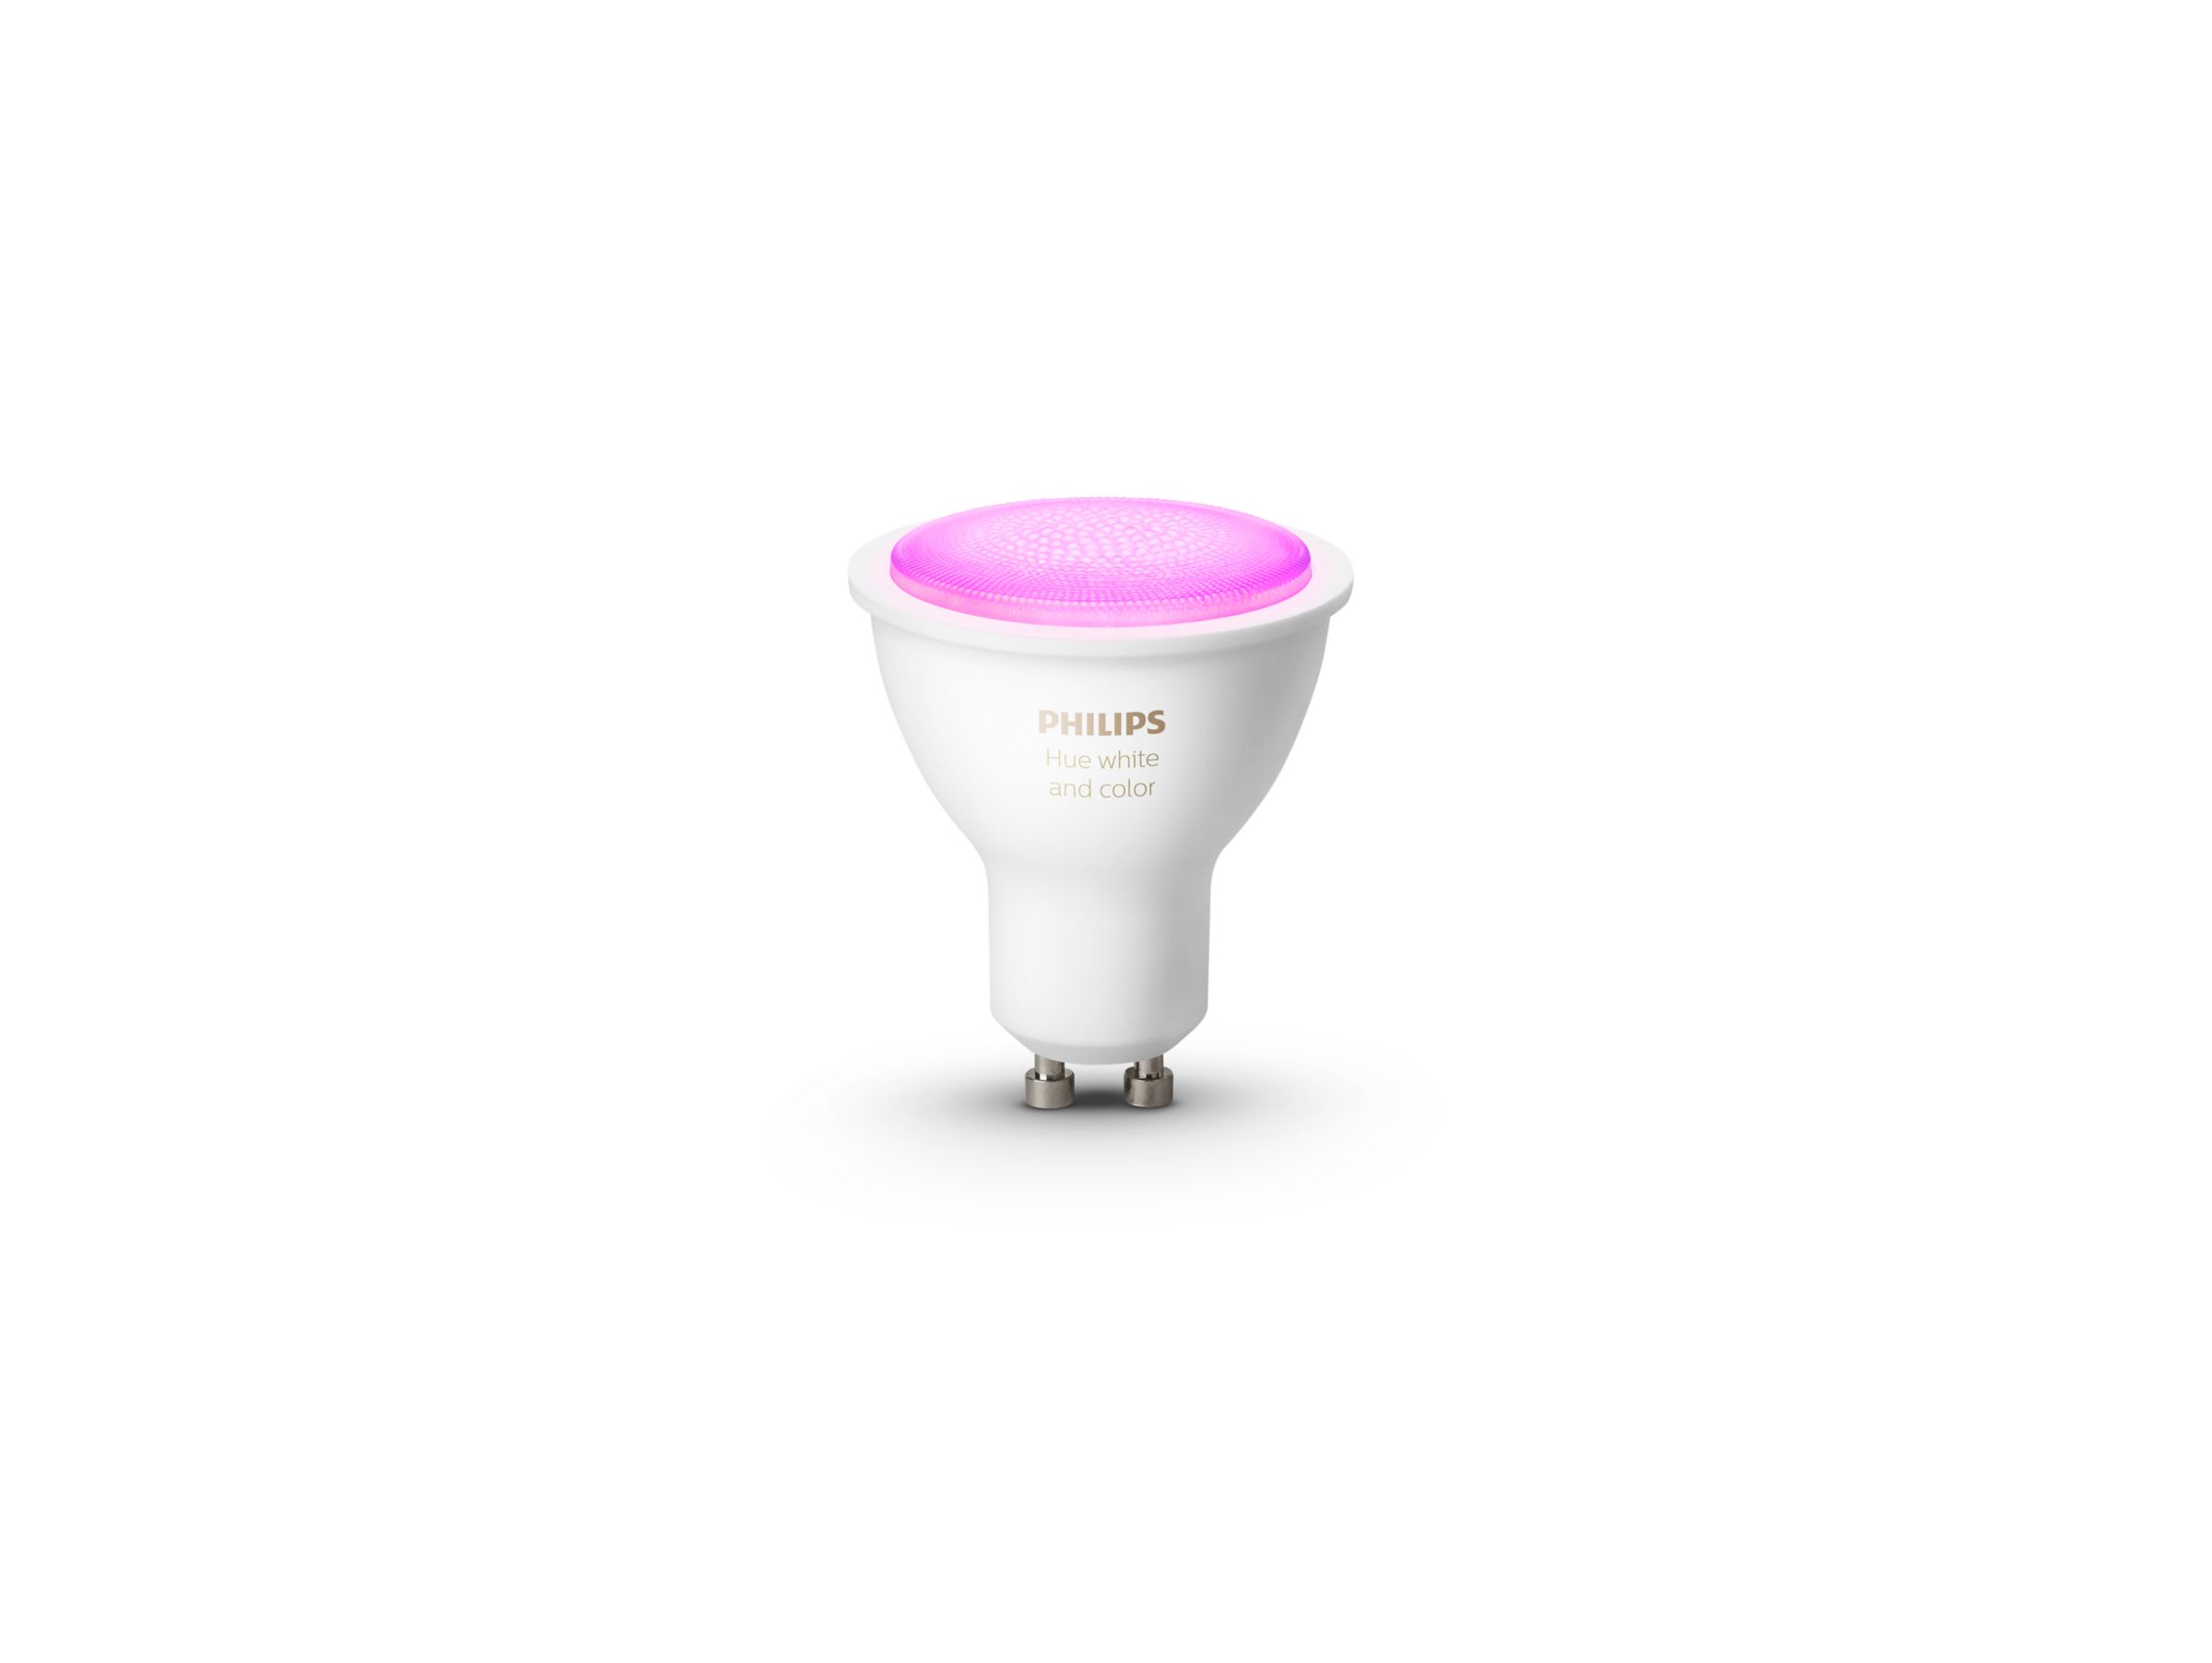 Philips Hue White and Colour Ambiance GU10